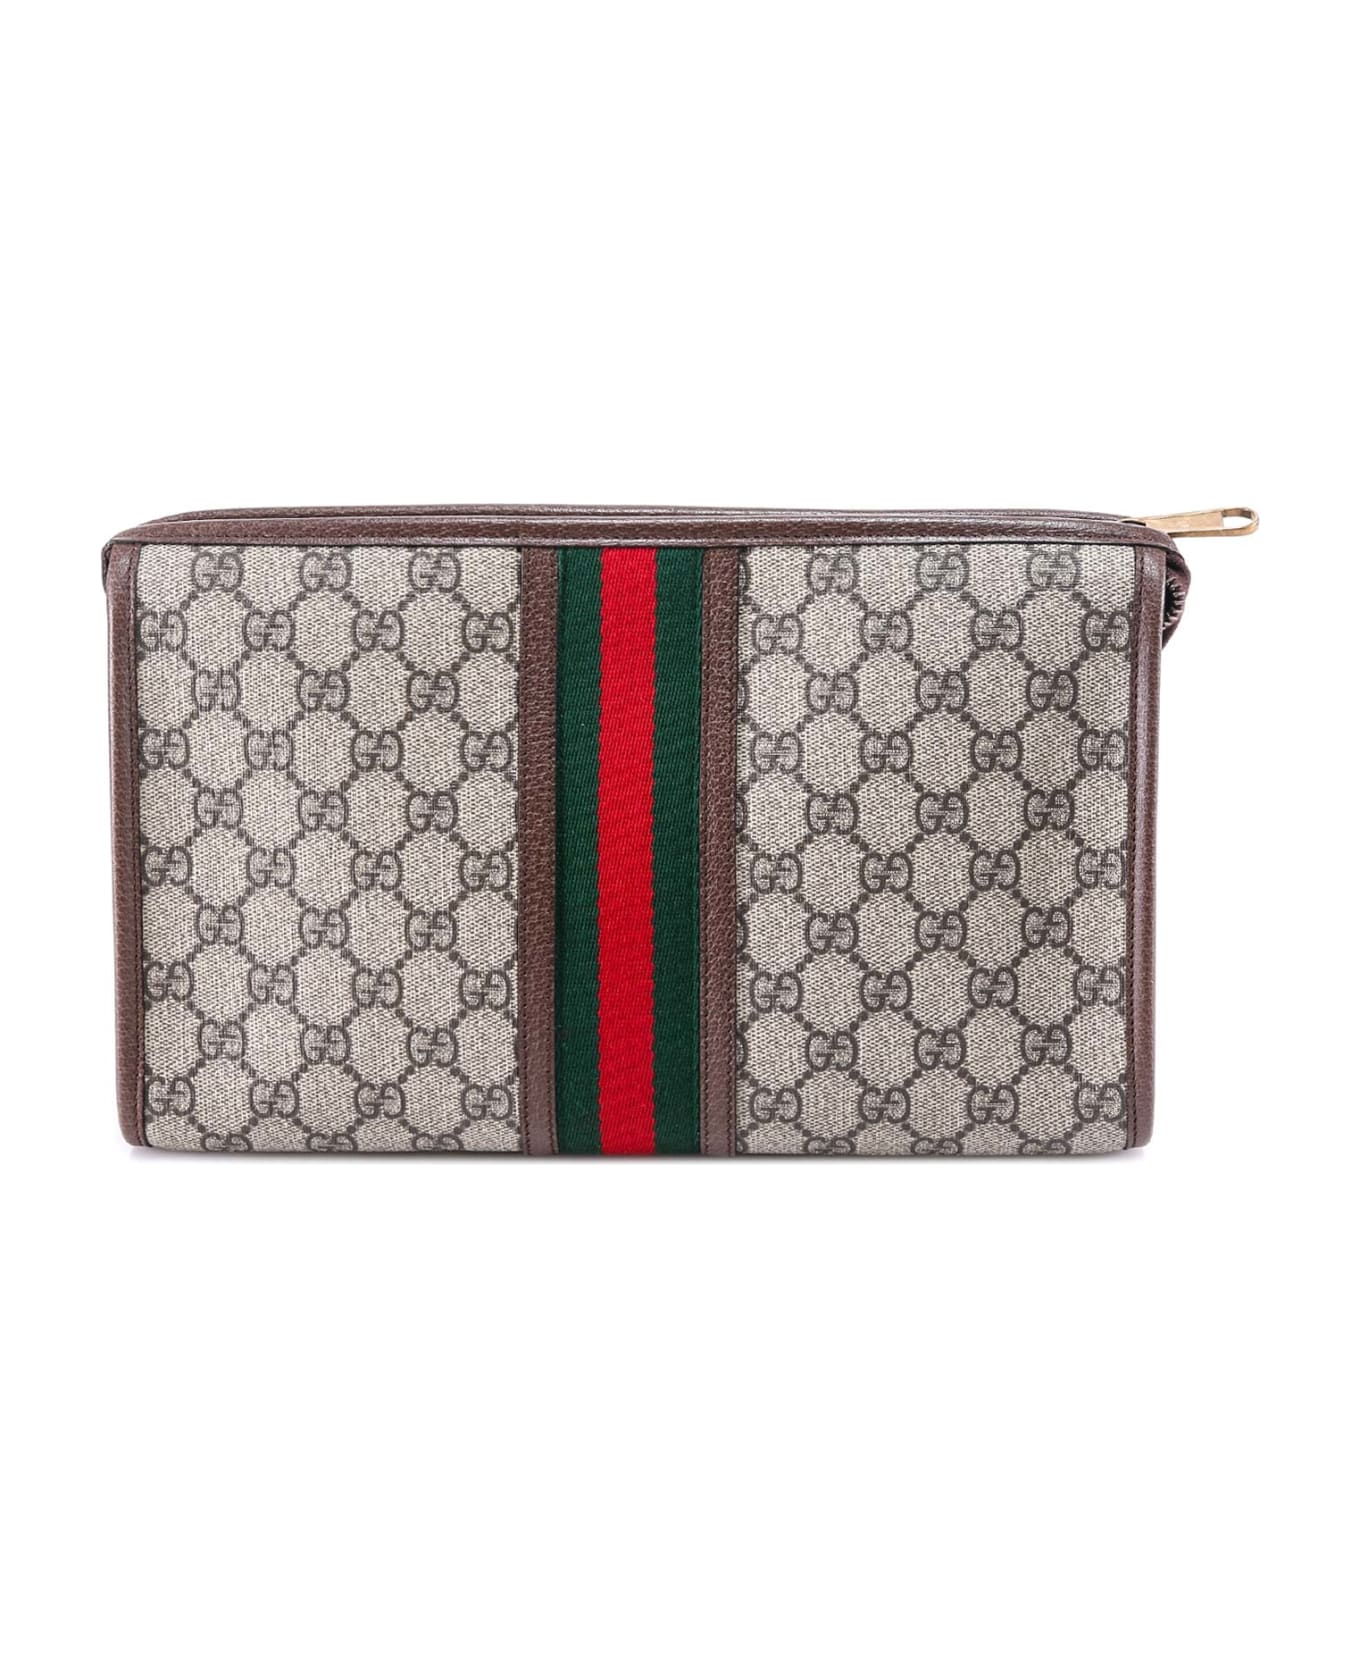 Gucci Ophidia Gg Beauty Case - Brown